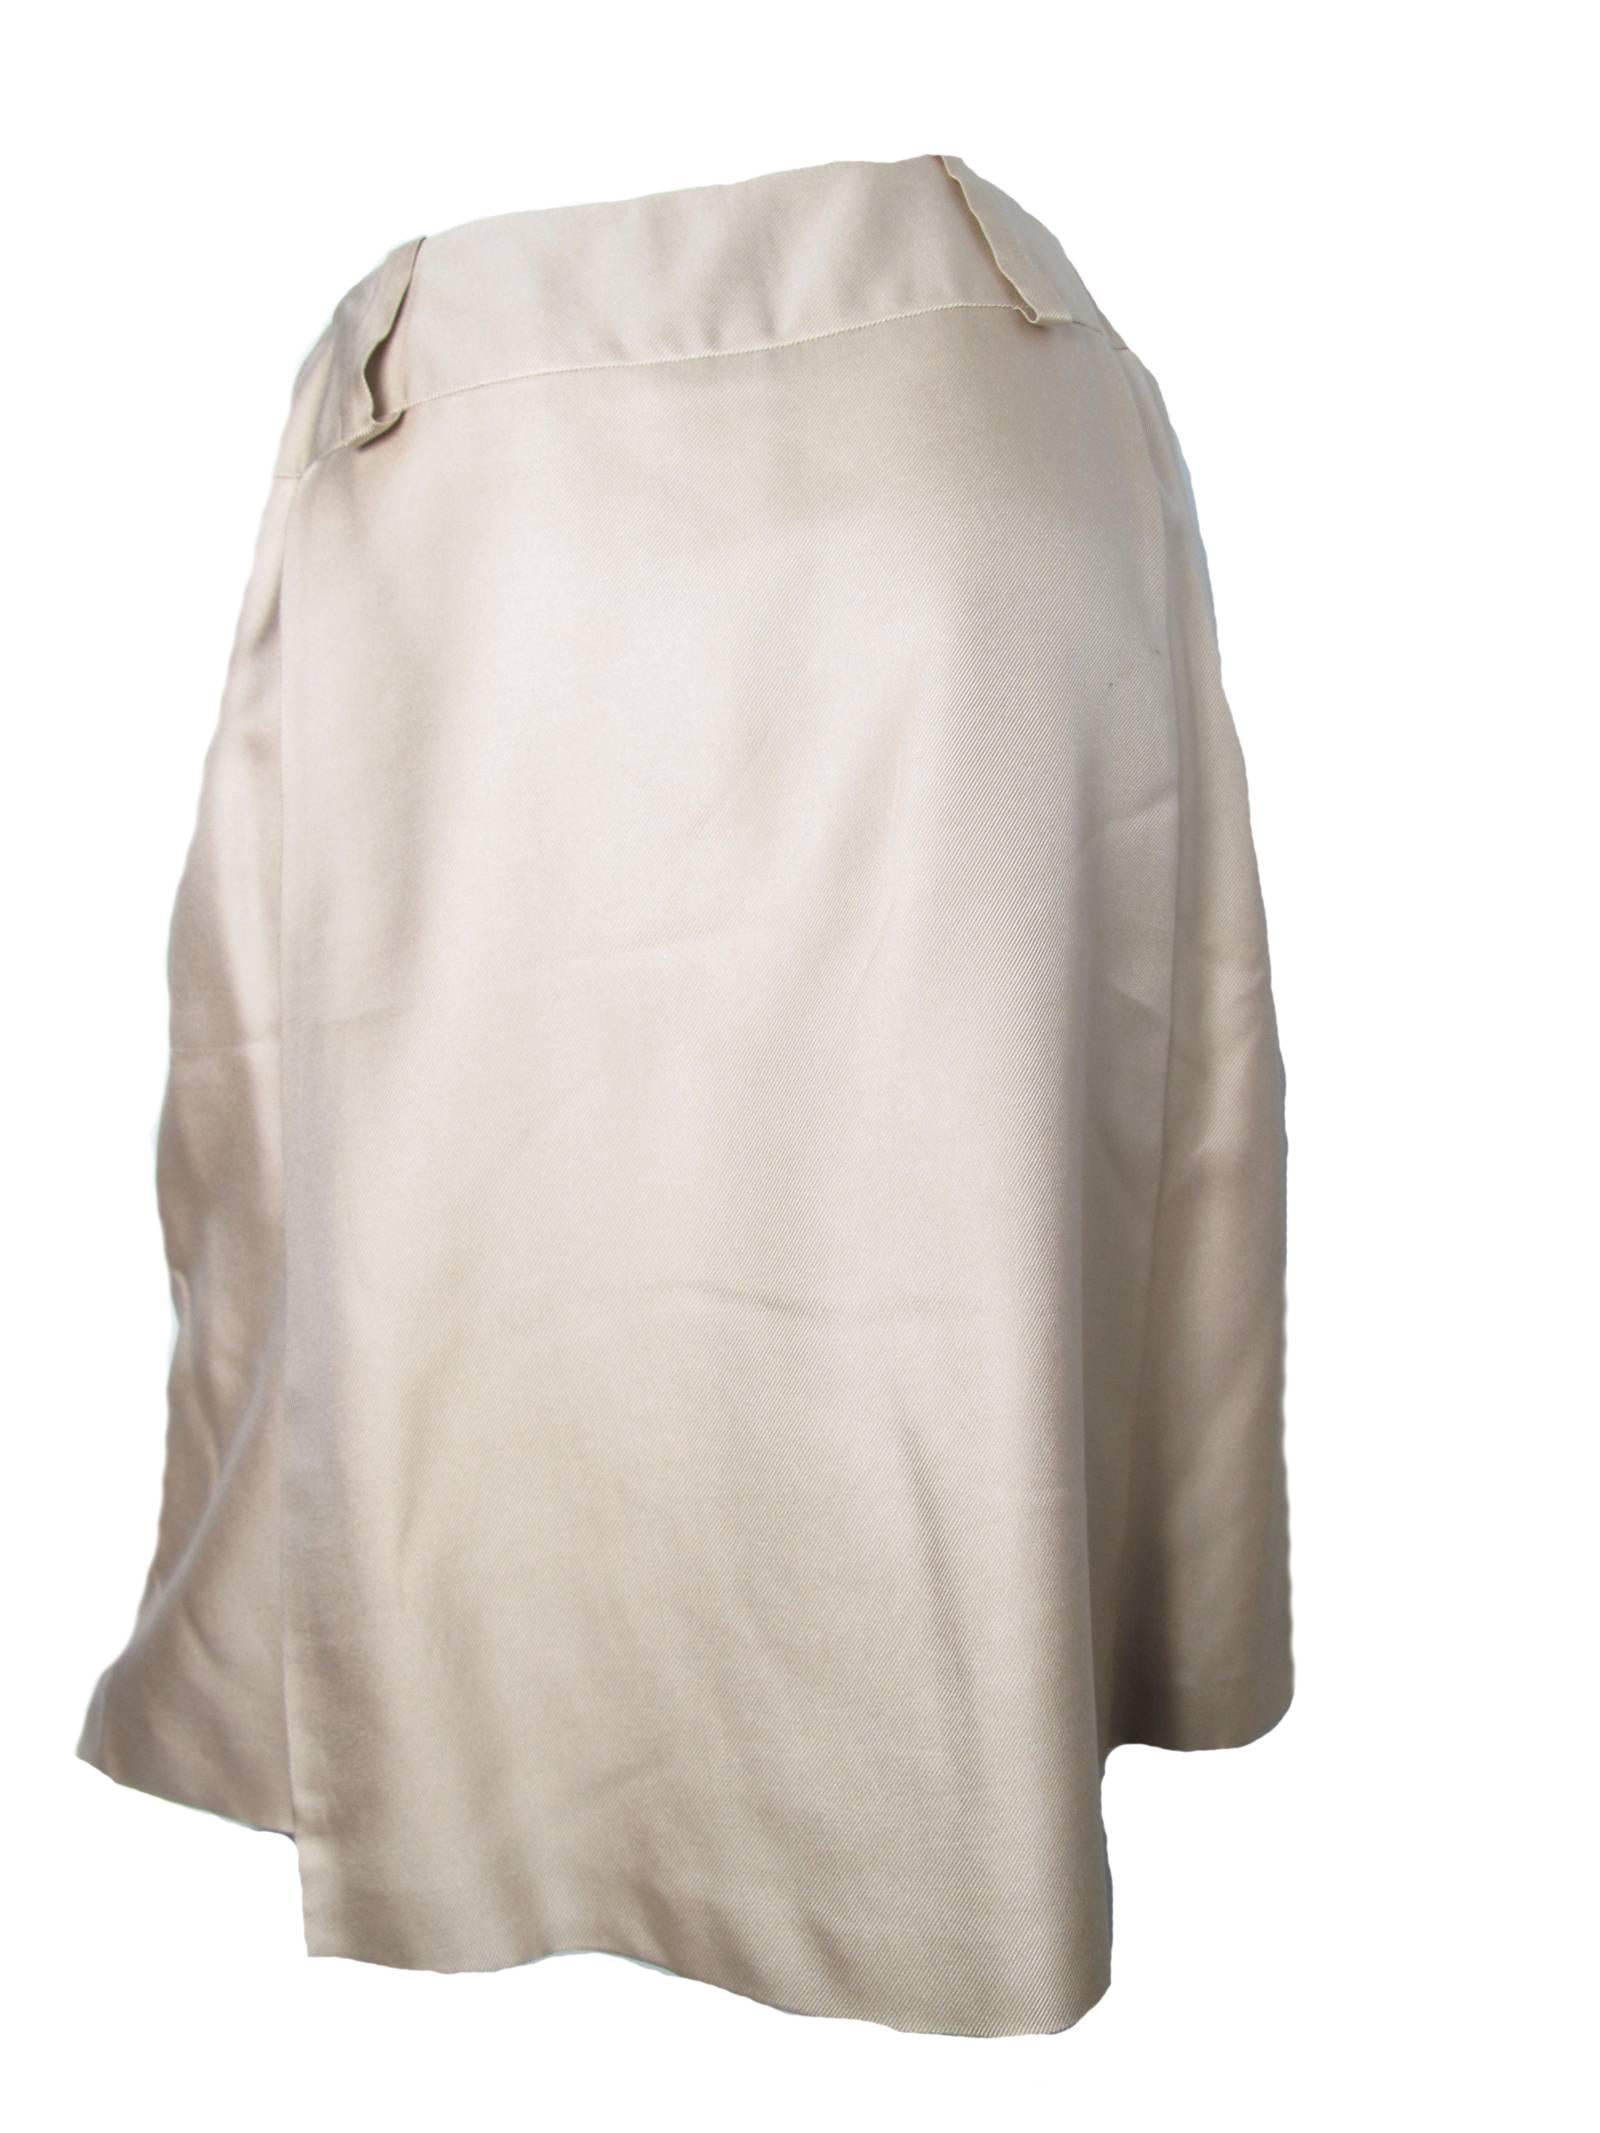 2001 Chanel Beige (ivory) silk skirt, mother of pearl logo.  Condition: Very good, small spot, see photos.  Size 40/ US 6 - 8

We accept returns for refund, please see our terms.  We offer free ground shipping within the US.  Let us know if you have